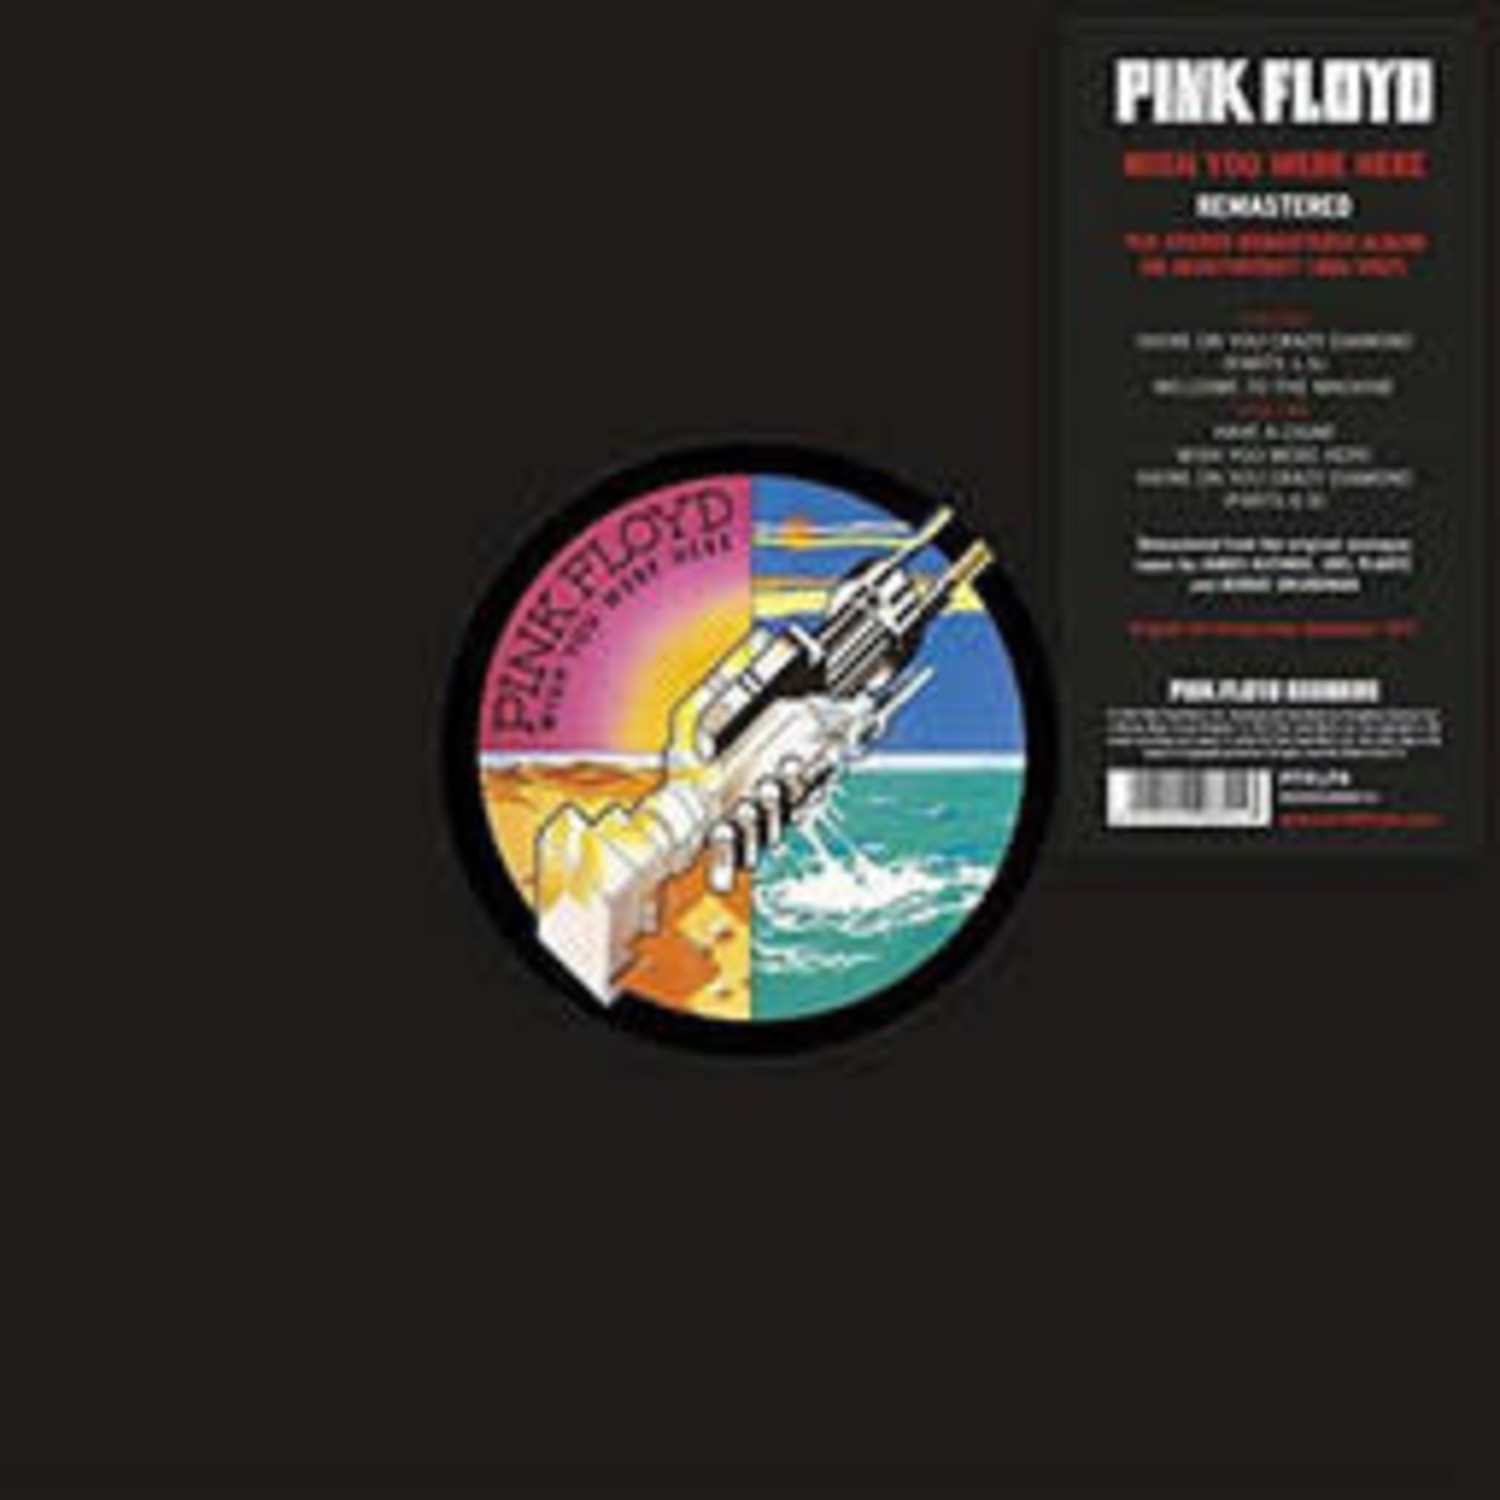 Pink Floyd - Wish You Were Here LP - Wax Trax Records